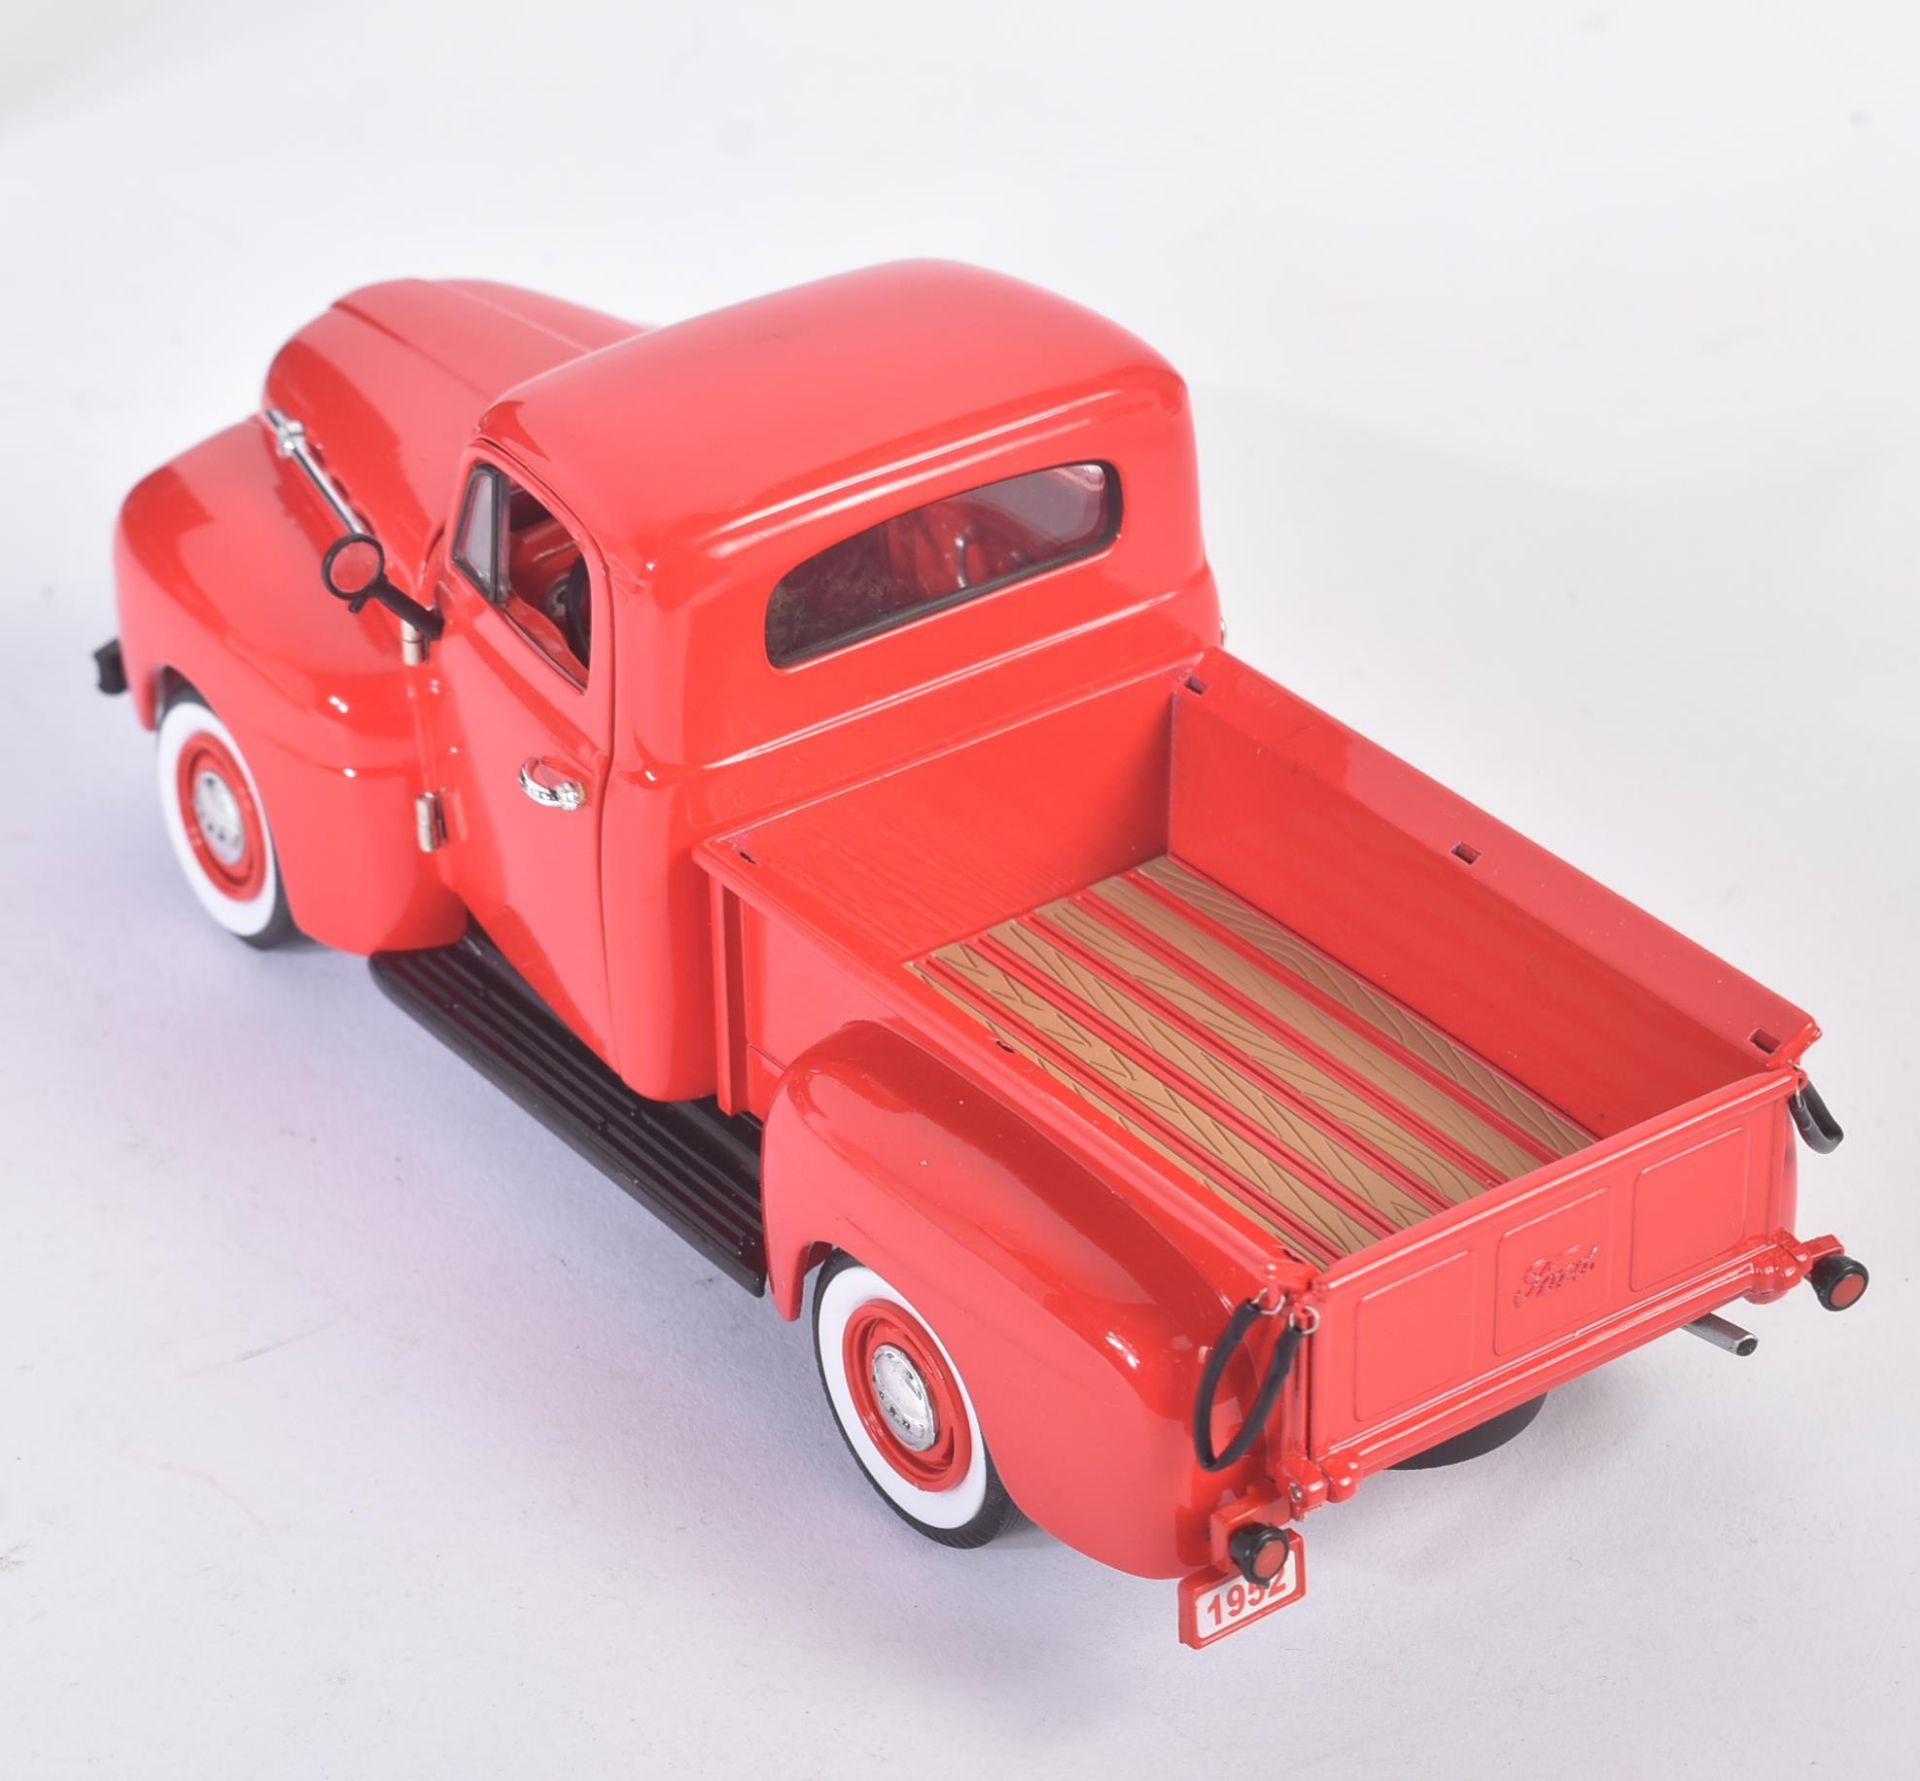 VINTAGE UNIQUE REPLICAS 1/24 SCALE DIECAST 1952 FORD PICKUP - Image 3 of 5